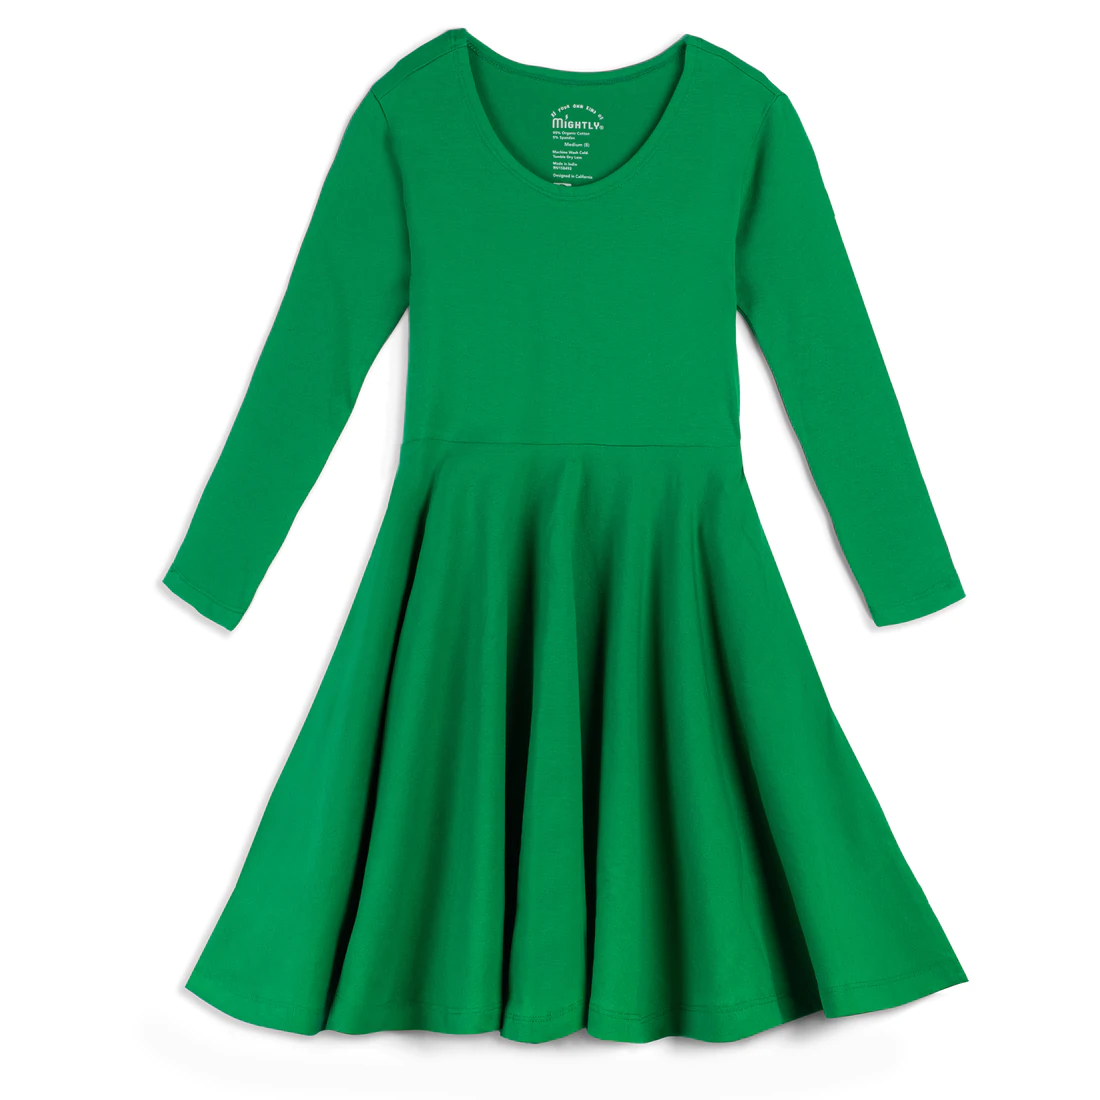 organic cotton dresses for kids from mightly